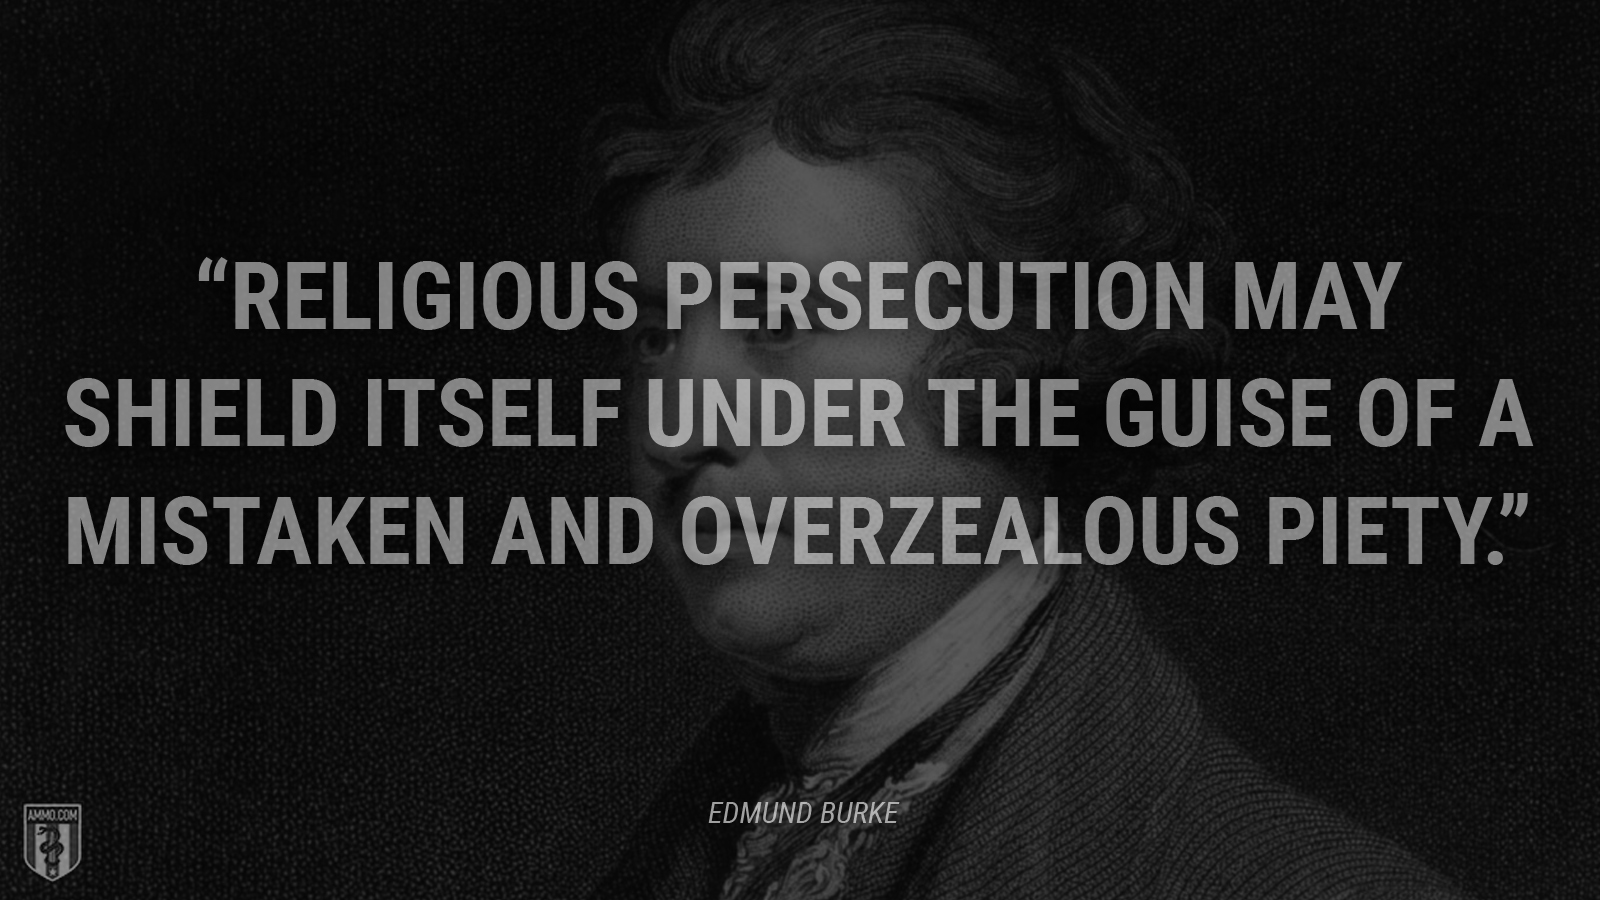 “Religious persecution may shield itself under the guise of a mistaken and overzealous piety.” - Edmund Burke